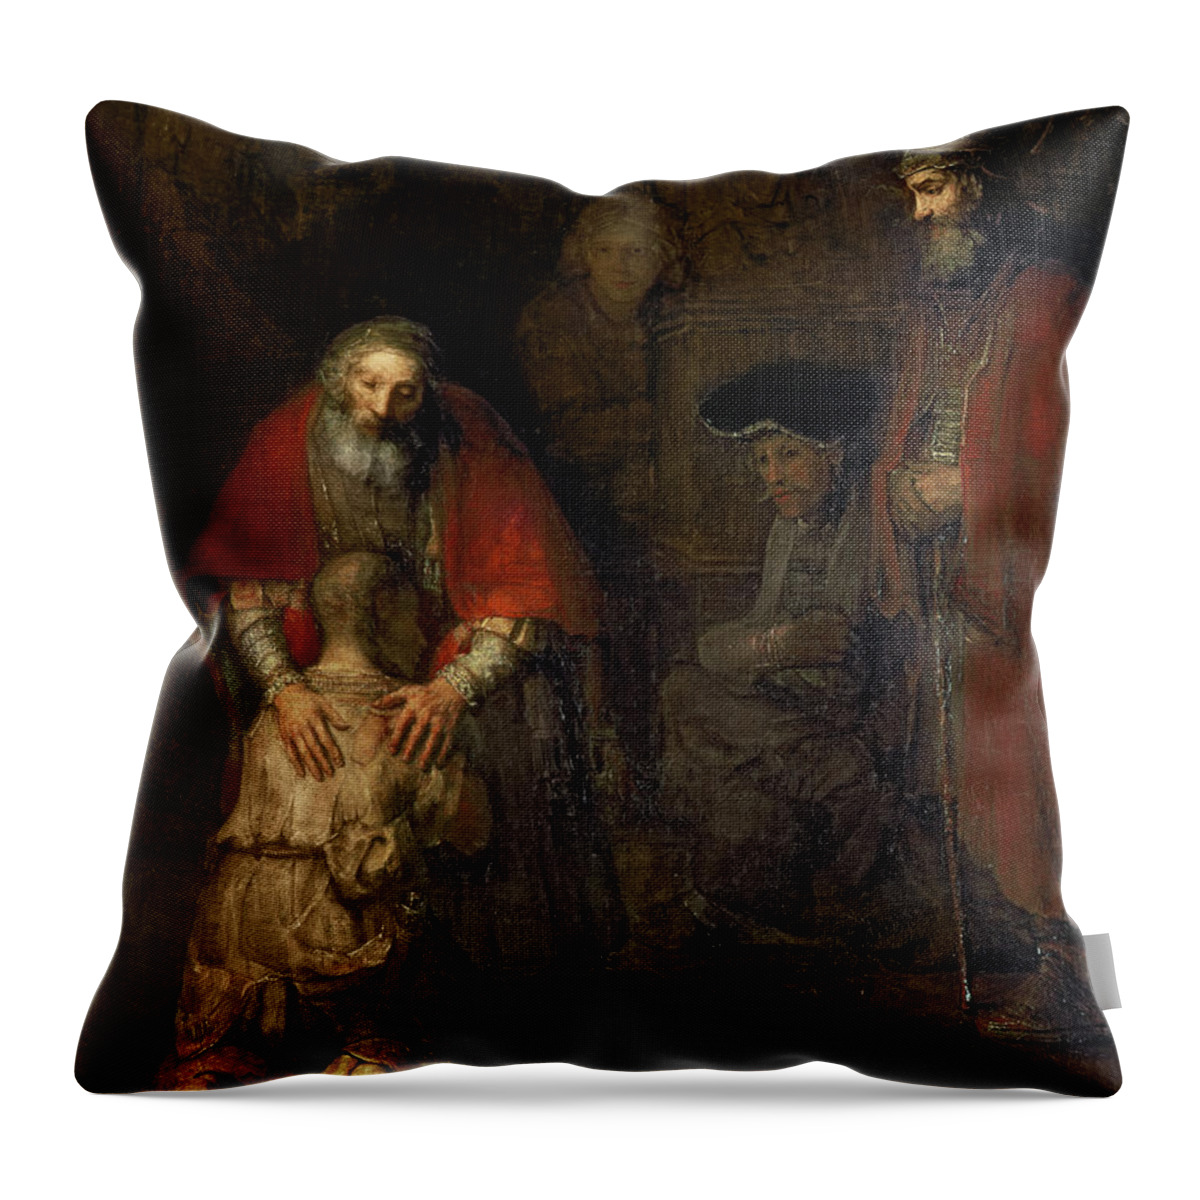 Return Throw Pillow featuring the painting Return of the Prodigal Son by Rembrandt Harmenszoon van Rijn